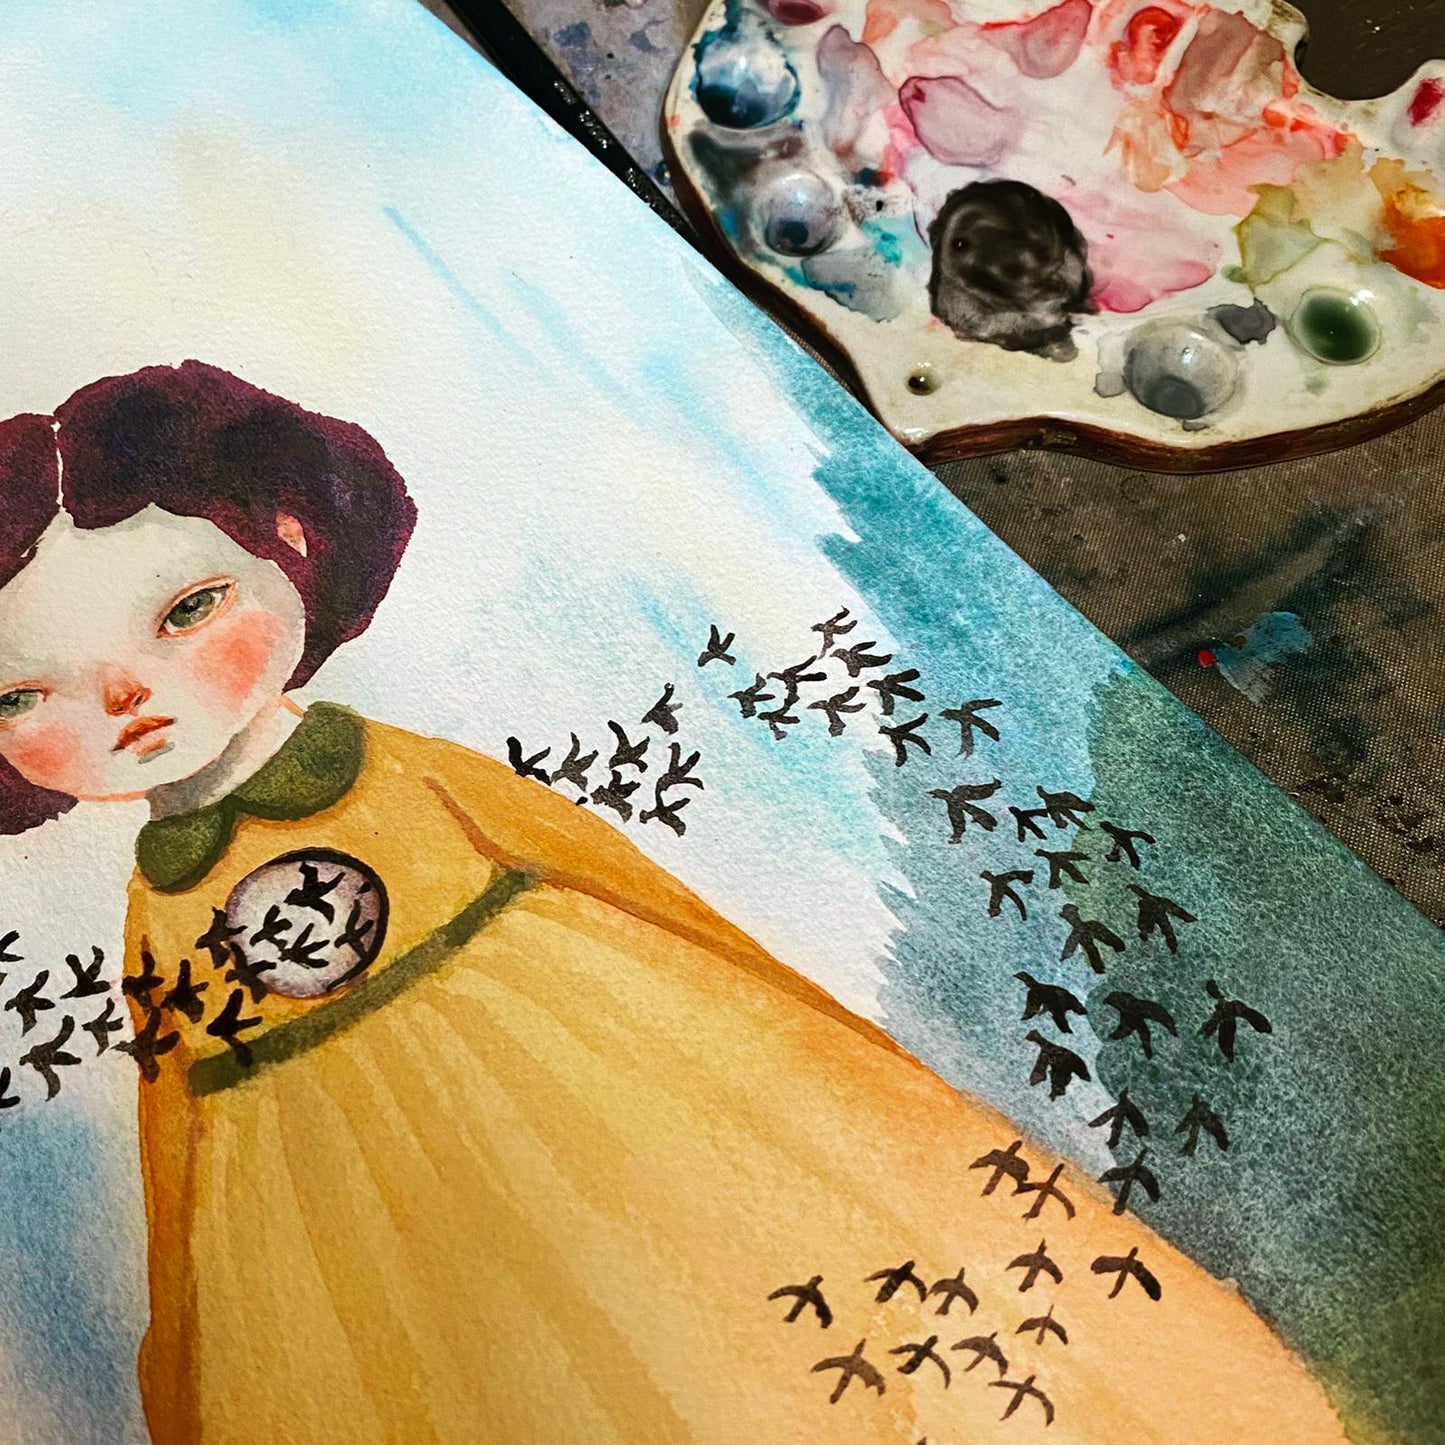 A beautiful original watercolor by Idania Salcido, the artist behind Danita Art.  A vintage looking girl in a yellow dress and a hole in her heart. Black birds go trough her and take her sorrows away.